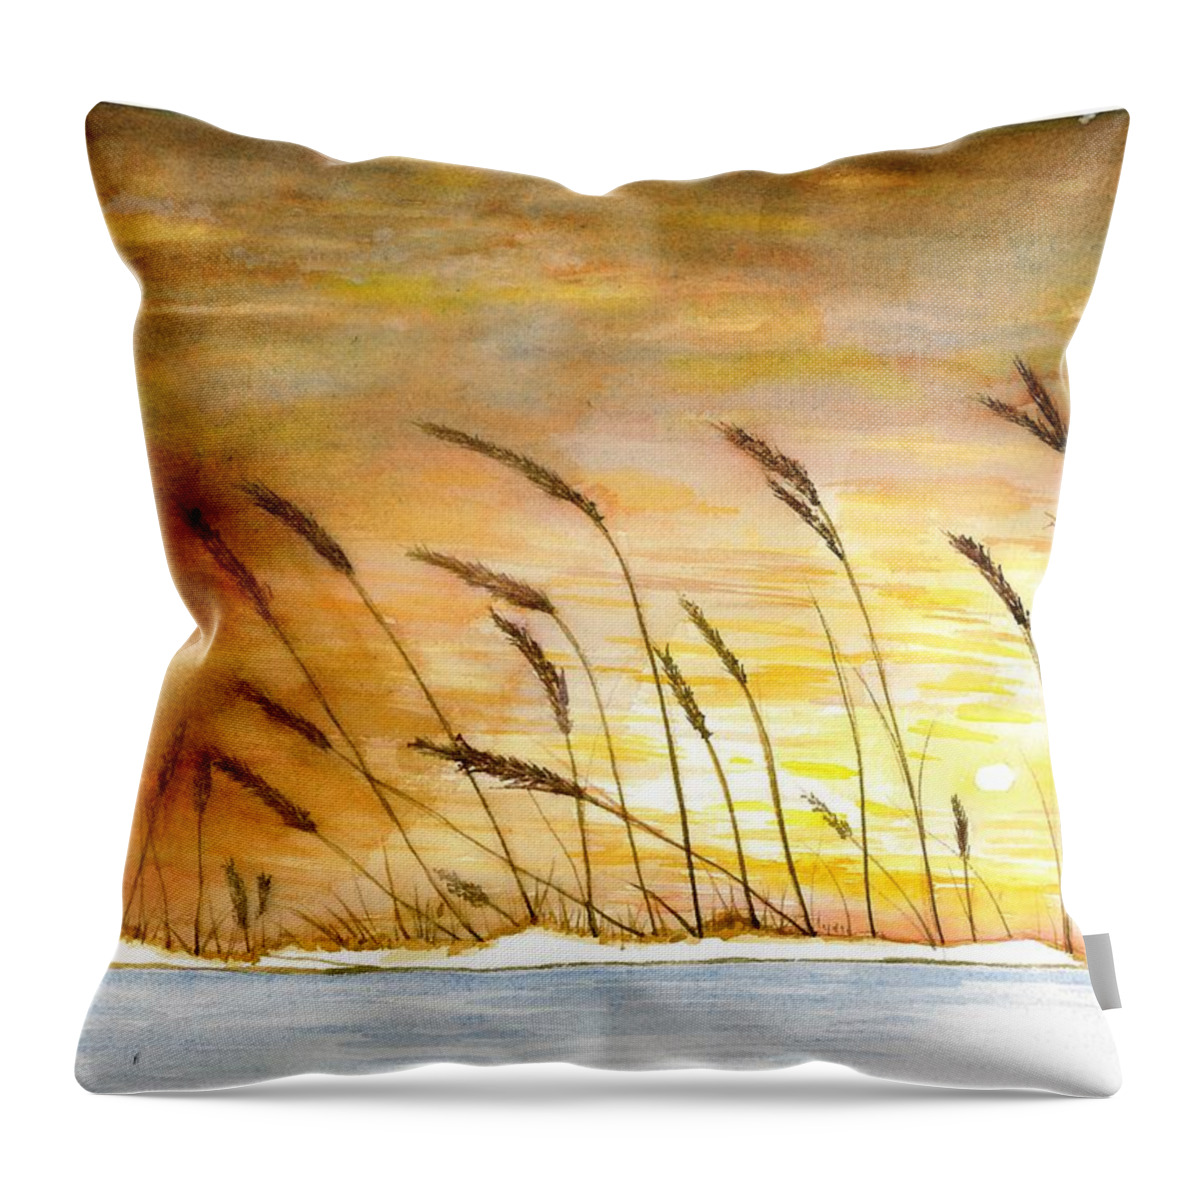 Wheat Throw Pillow featuring the painting Wheat by David Bartsch